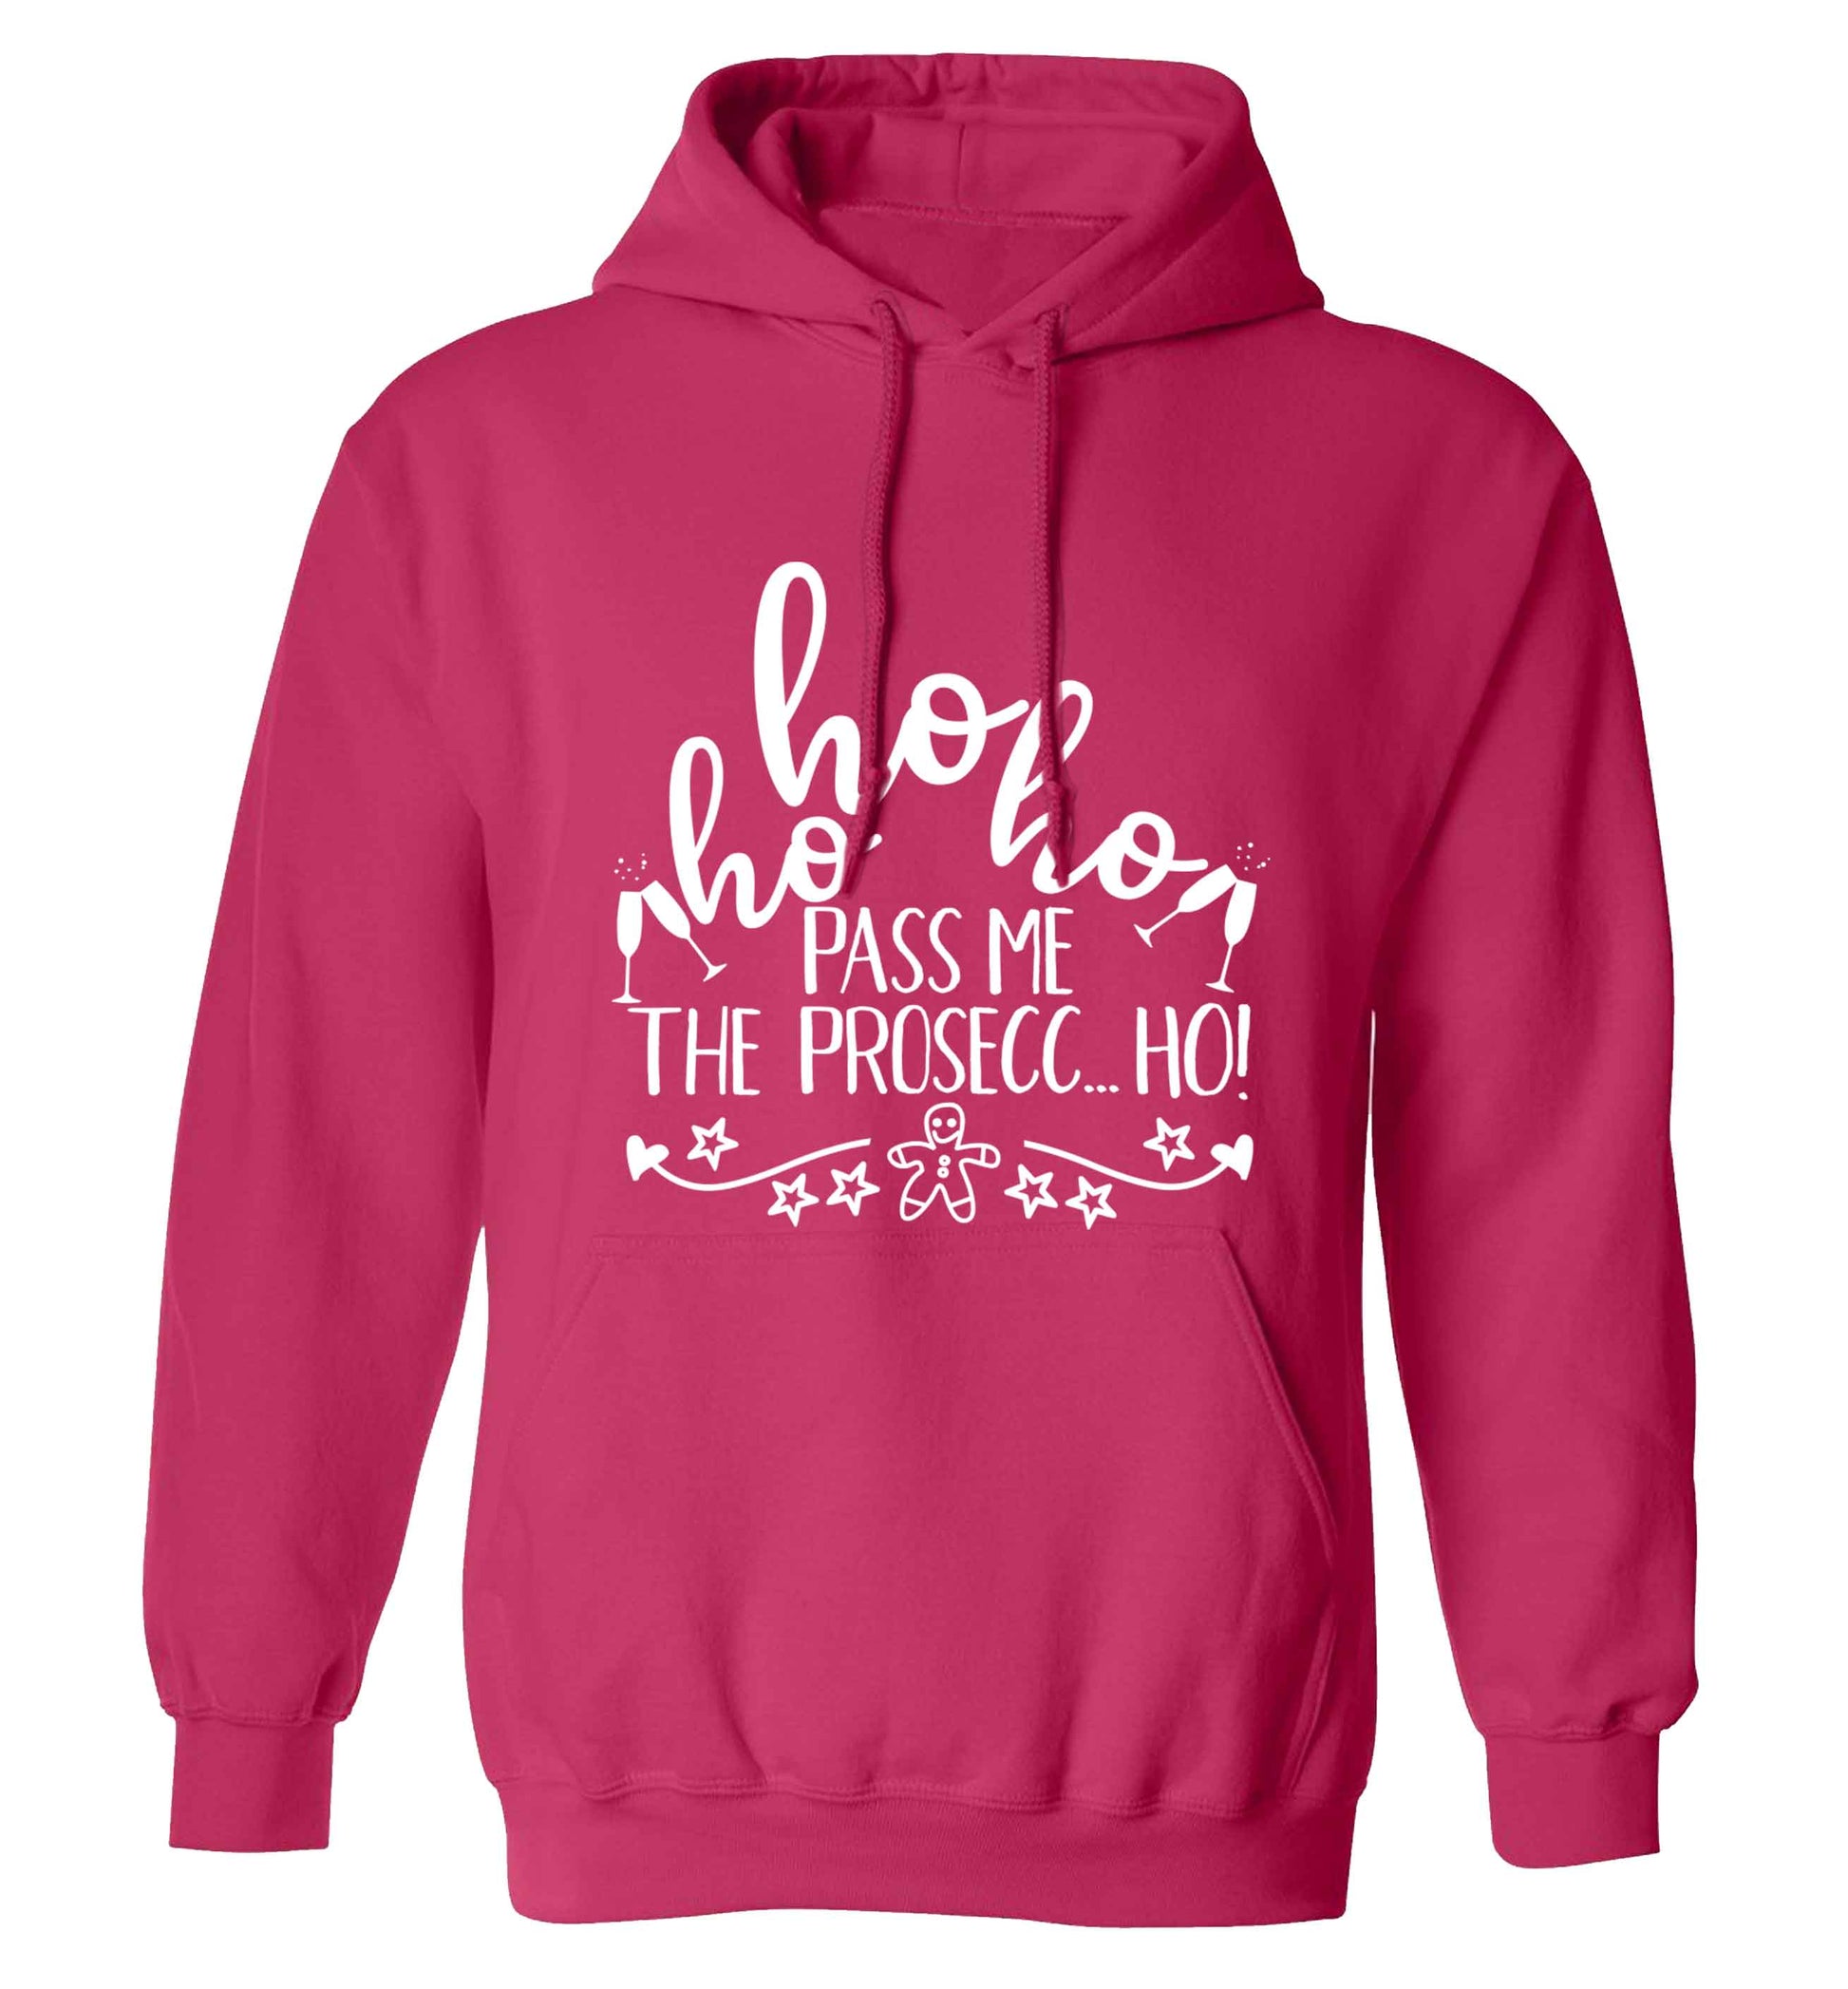 Ho ho ho pass me the prosecco adults unisex pink hoodie 2XL